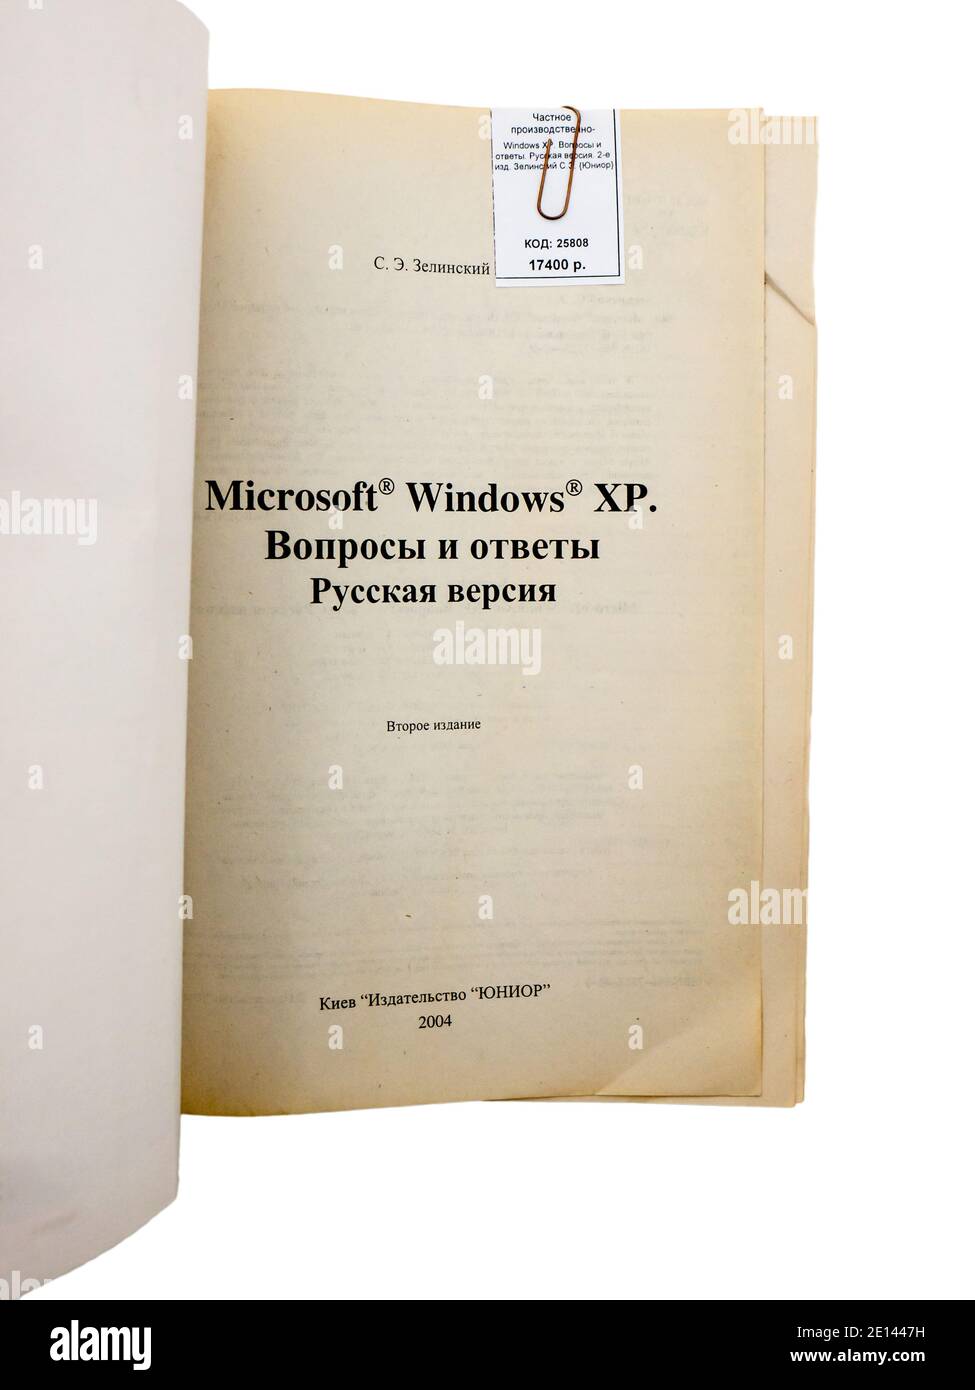 The "Windows XP" of S.E. Zelensky, first published in 2004  in Ukraine. Stock Photo